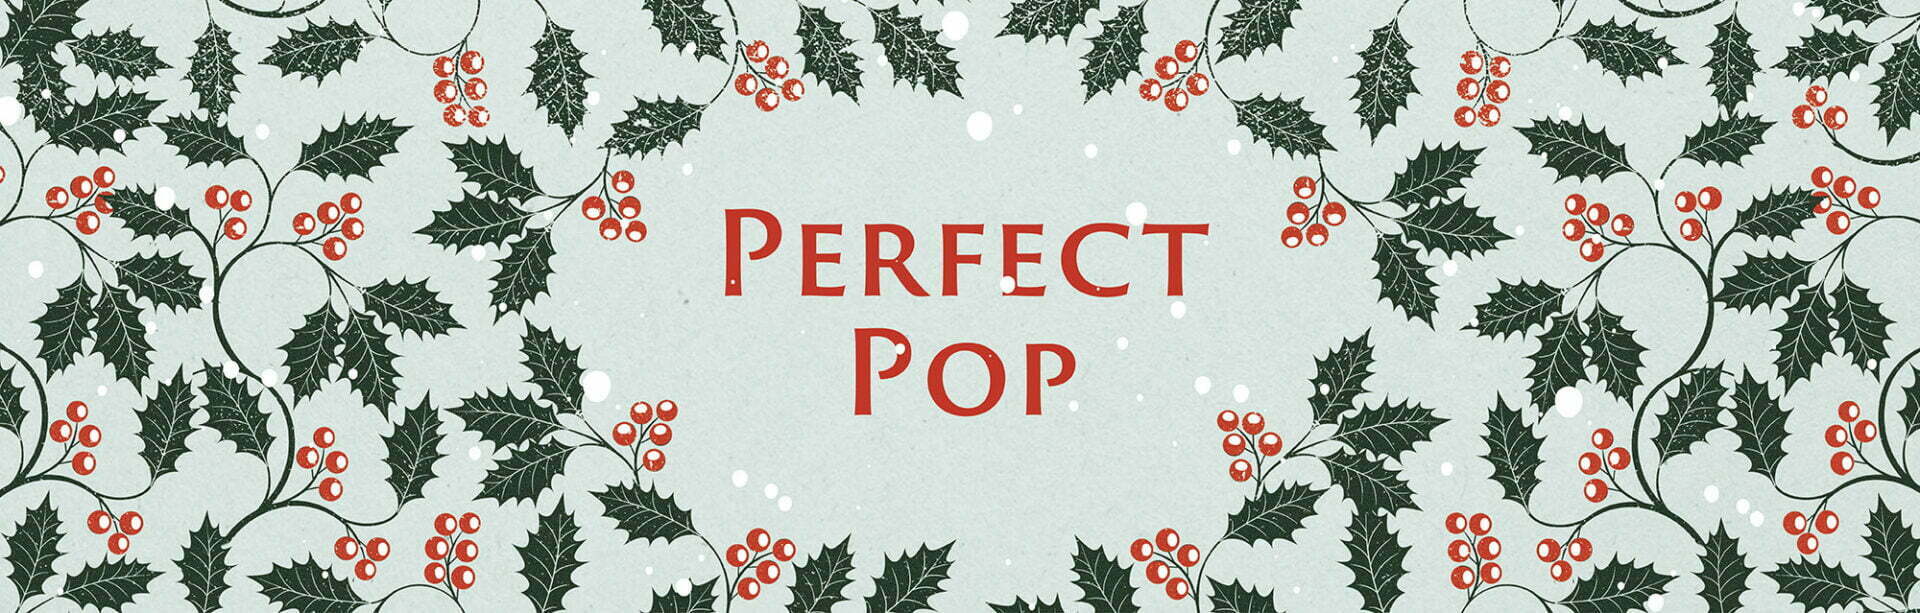 https://faber.wp.dev.diffusion.digital/wp-content/uploads/2021/11/Faber-Christmas-Gift-Guide-Perfect-Pop-1920x613.jpg